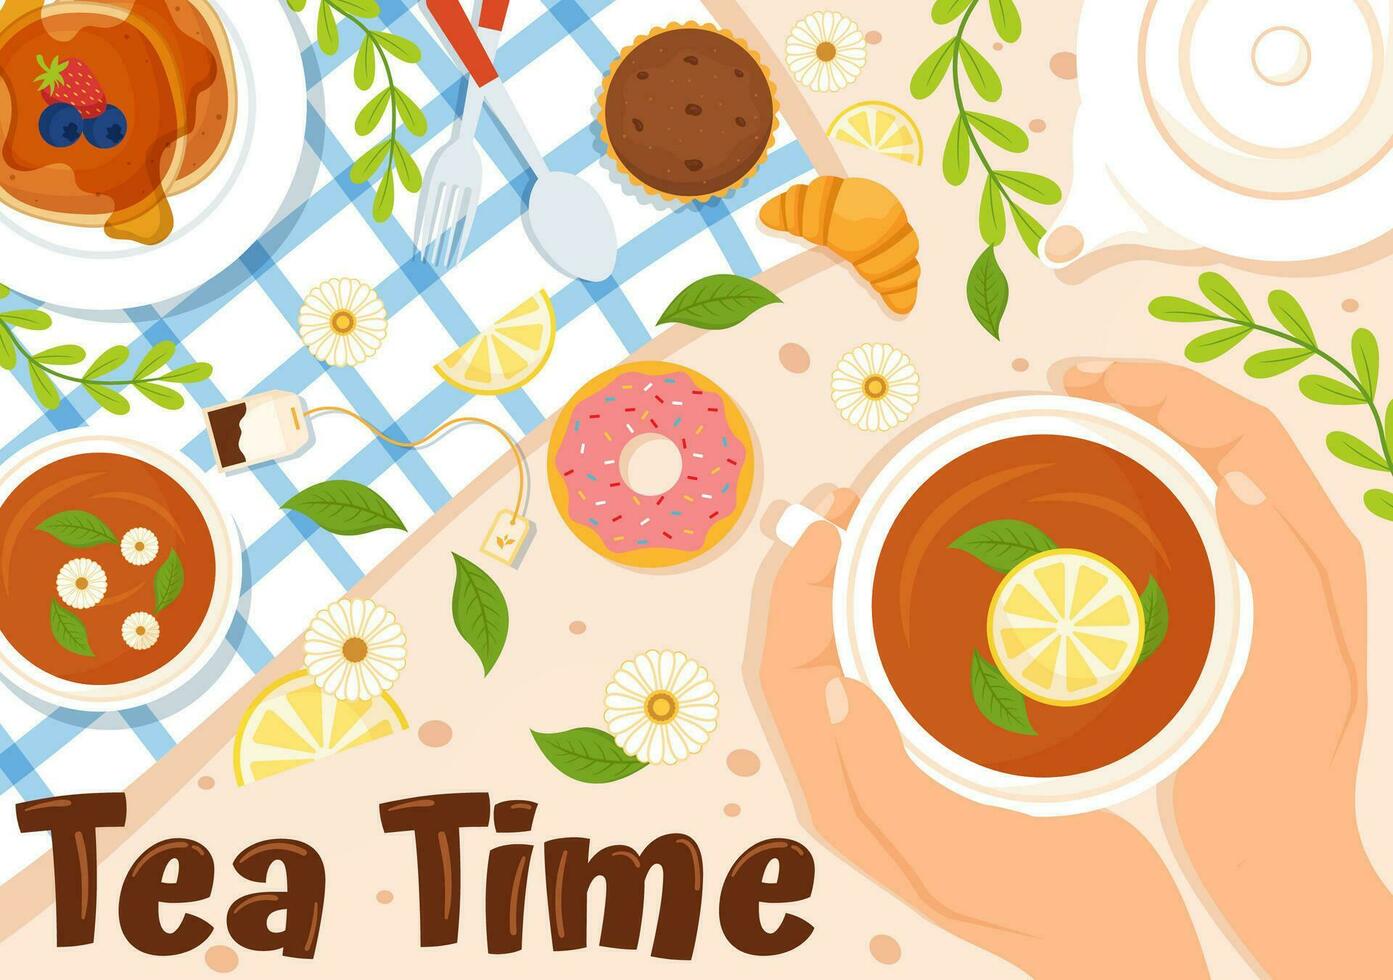 Tea Time Vector Illustration with Mug of Hot Drink, Sweet Desserts and Cookies Usually Done Between Meals in Flat Cartoon Hand Drawn Templates